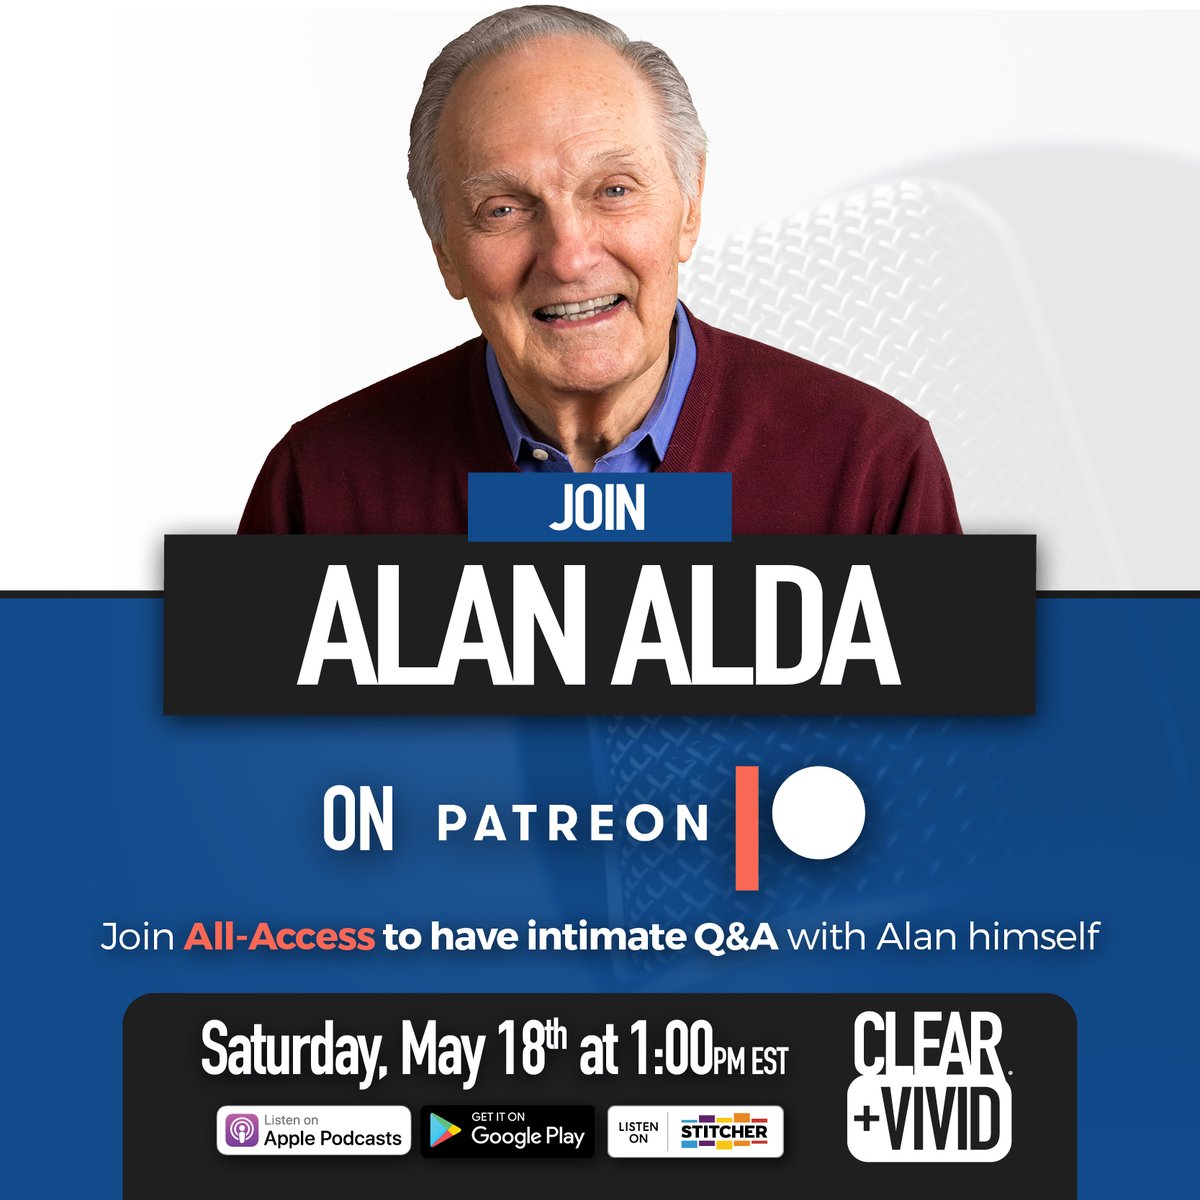 🚨ATTENTION🚨 All-Access #ClearAndVivid Patrons, @AlanAlda is hosting a Zoom Q&A THIS Saturday - May 18th, 1PM EST. Check your emails for the Zoom link today! 👉patreon.com/clearandvivid After production costs, all proceeds of #ClearAndVivid go to @AldaCenter.